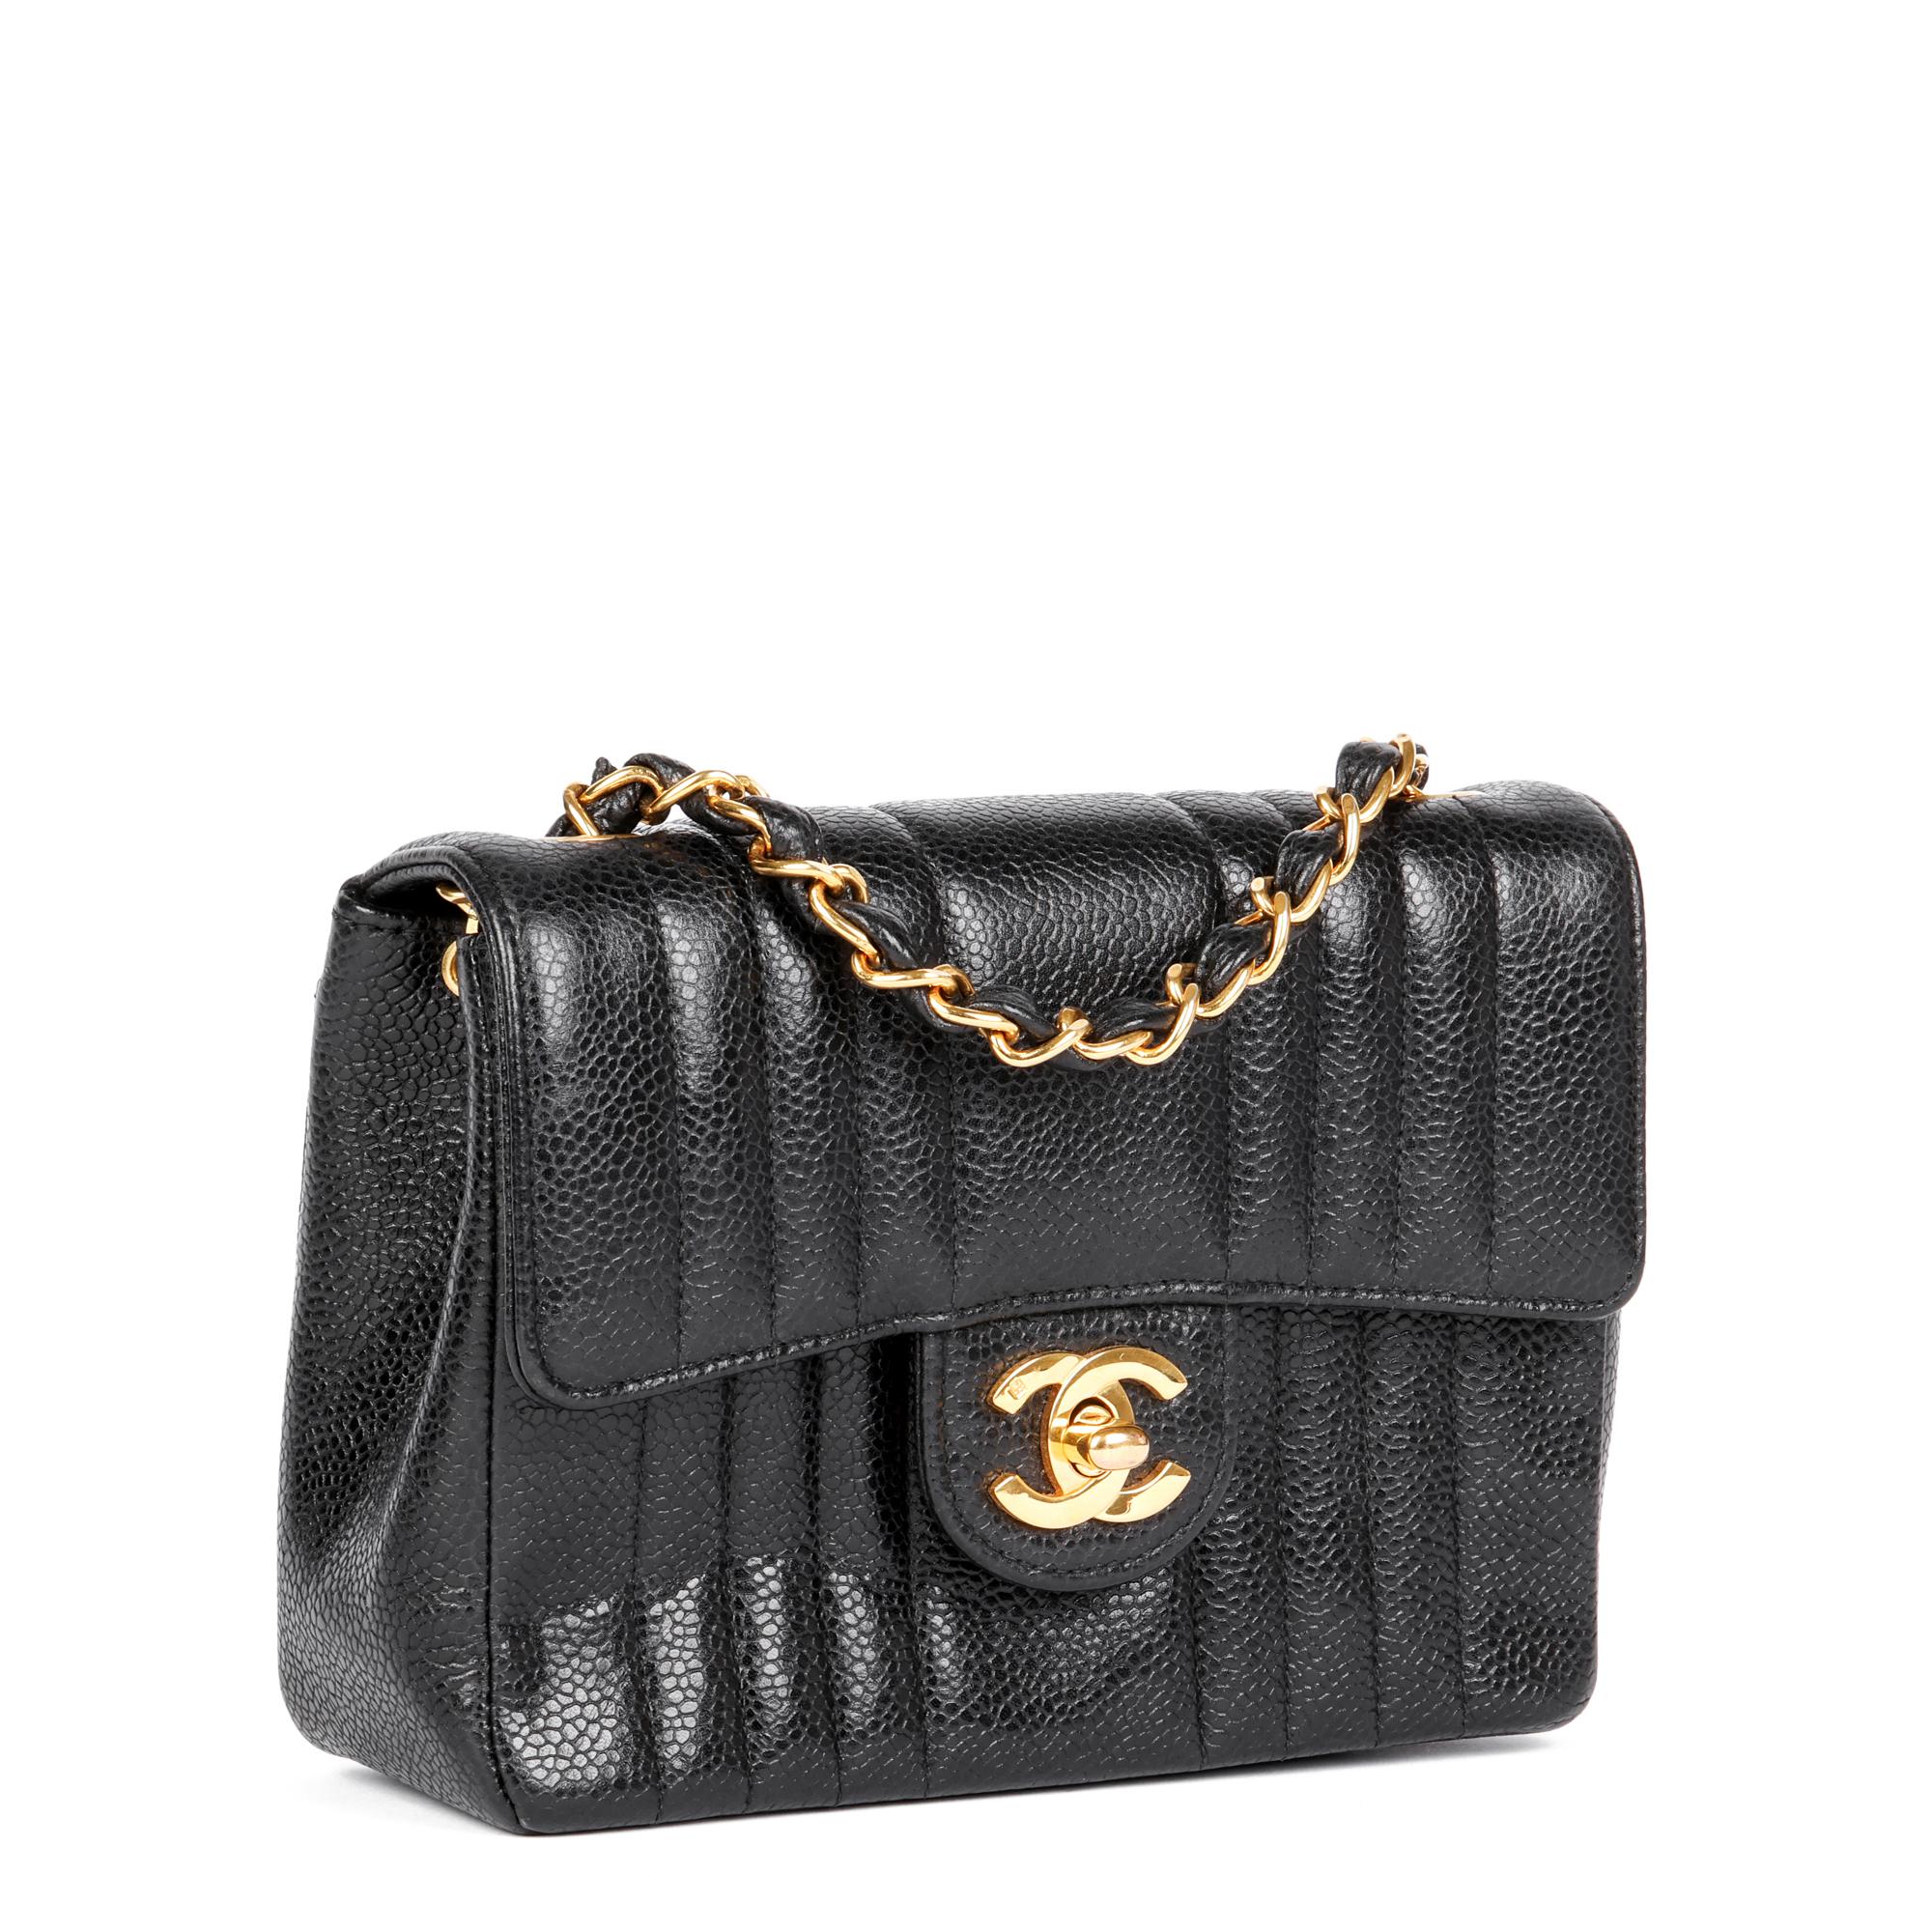 CHANEL
Black Vertical Quilted Caviar Leather Vintage Square Mini Flap Bag

Xupes Reference: HB4874
Serial Number: 24253376
Age (Circa): 1992
Accompanied By: Chanel Dust Bag
Authenticity Details: Serial Sticker (Made in France)
Gender: Ladies
Type: